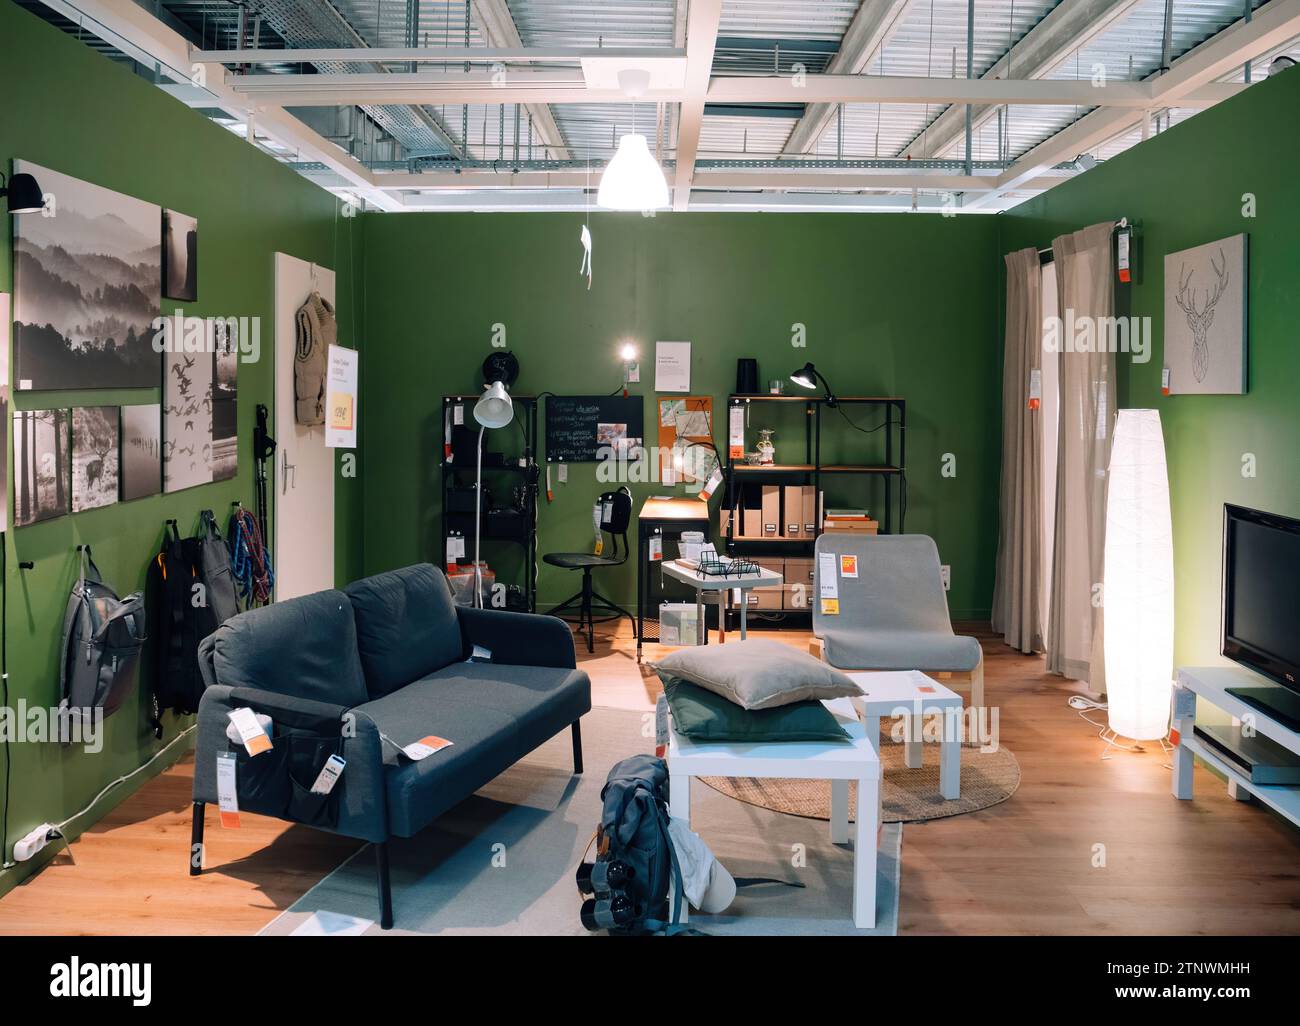 Paris, France - Aug 31, 2023: Explore a modern IKEA furniture store offering ample examples of decorating a teenager's interior room with TV, sofa, an Stock Photo